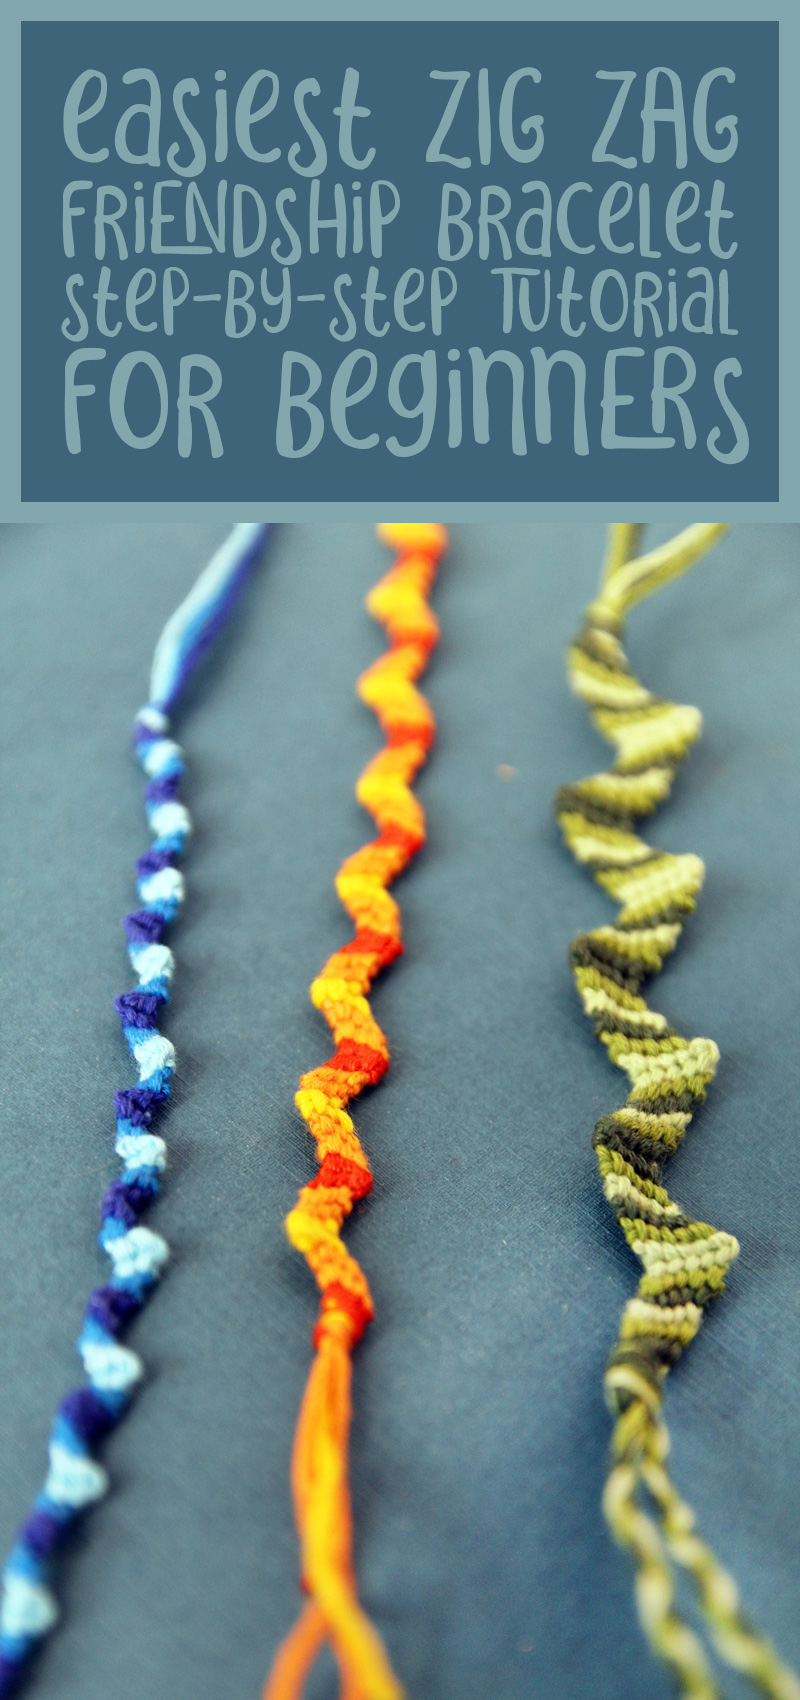 Easy Friendship Bracelet  Basic ZigZag  Moms and Crafters